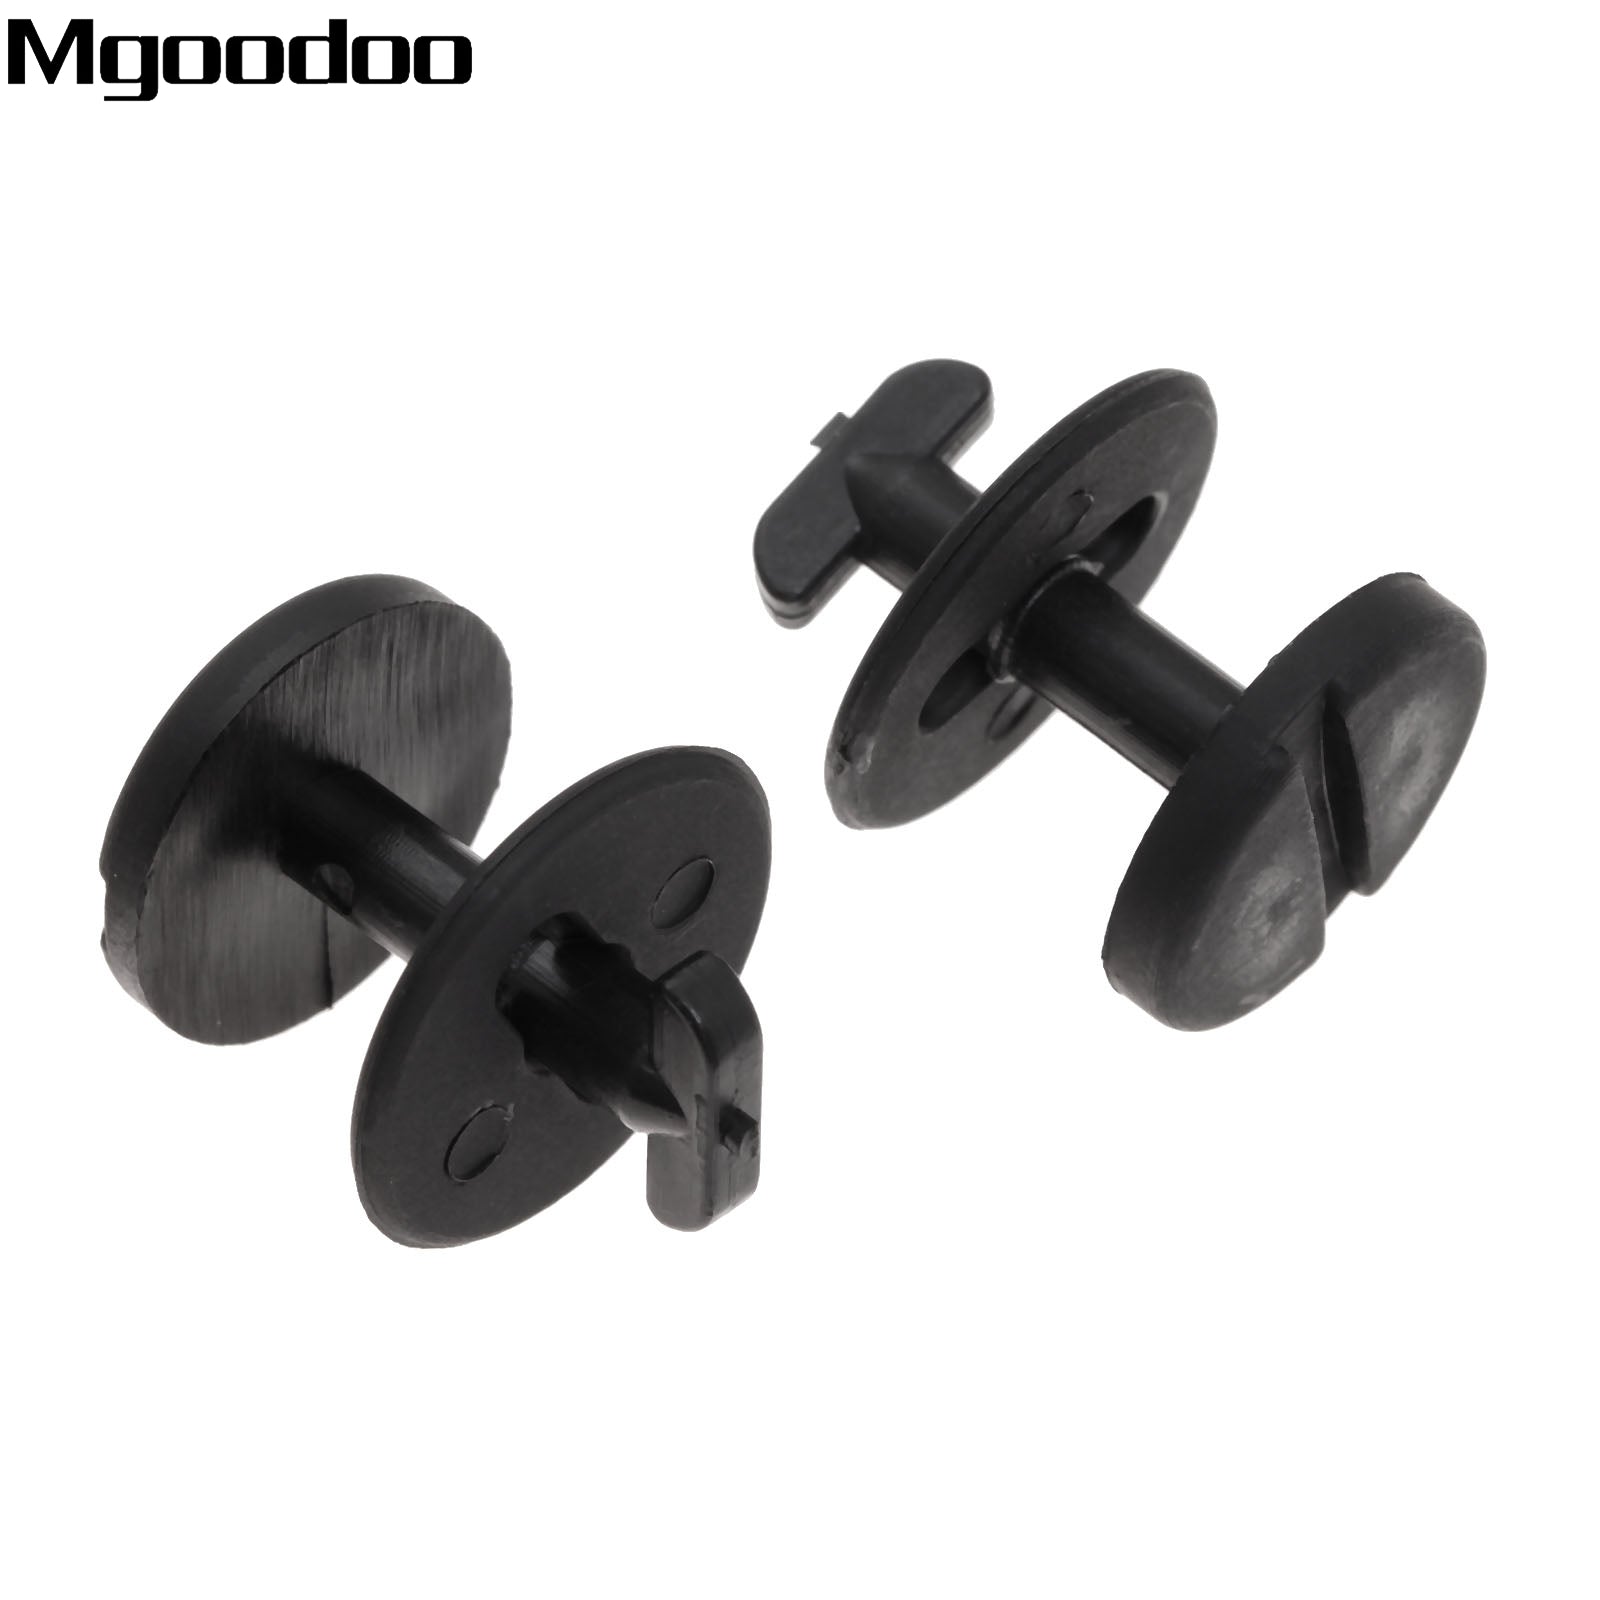 8 x Suitable for BMW Floor Carpet Mat Clips (Twist Lock With Washers) For BMW E36 E46 E38 E39